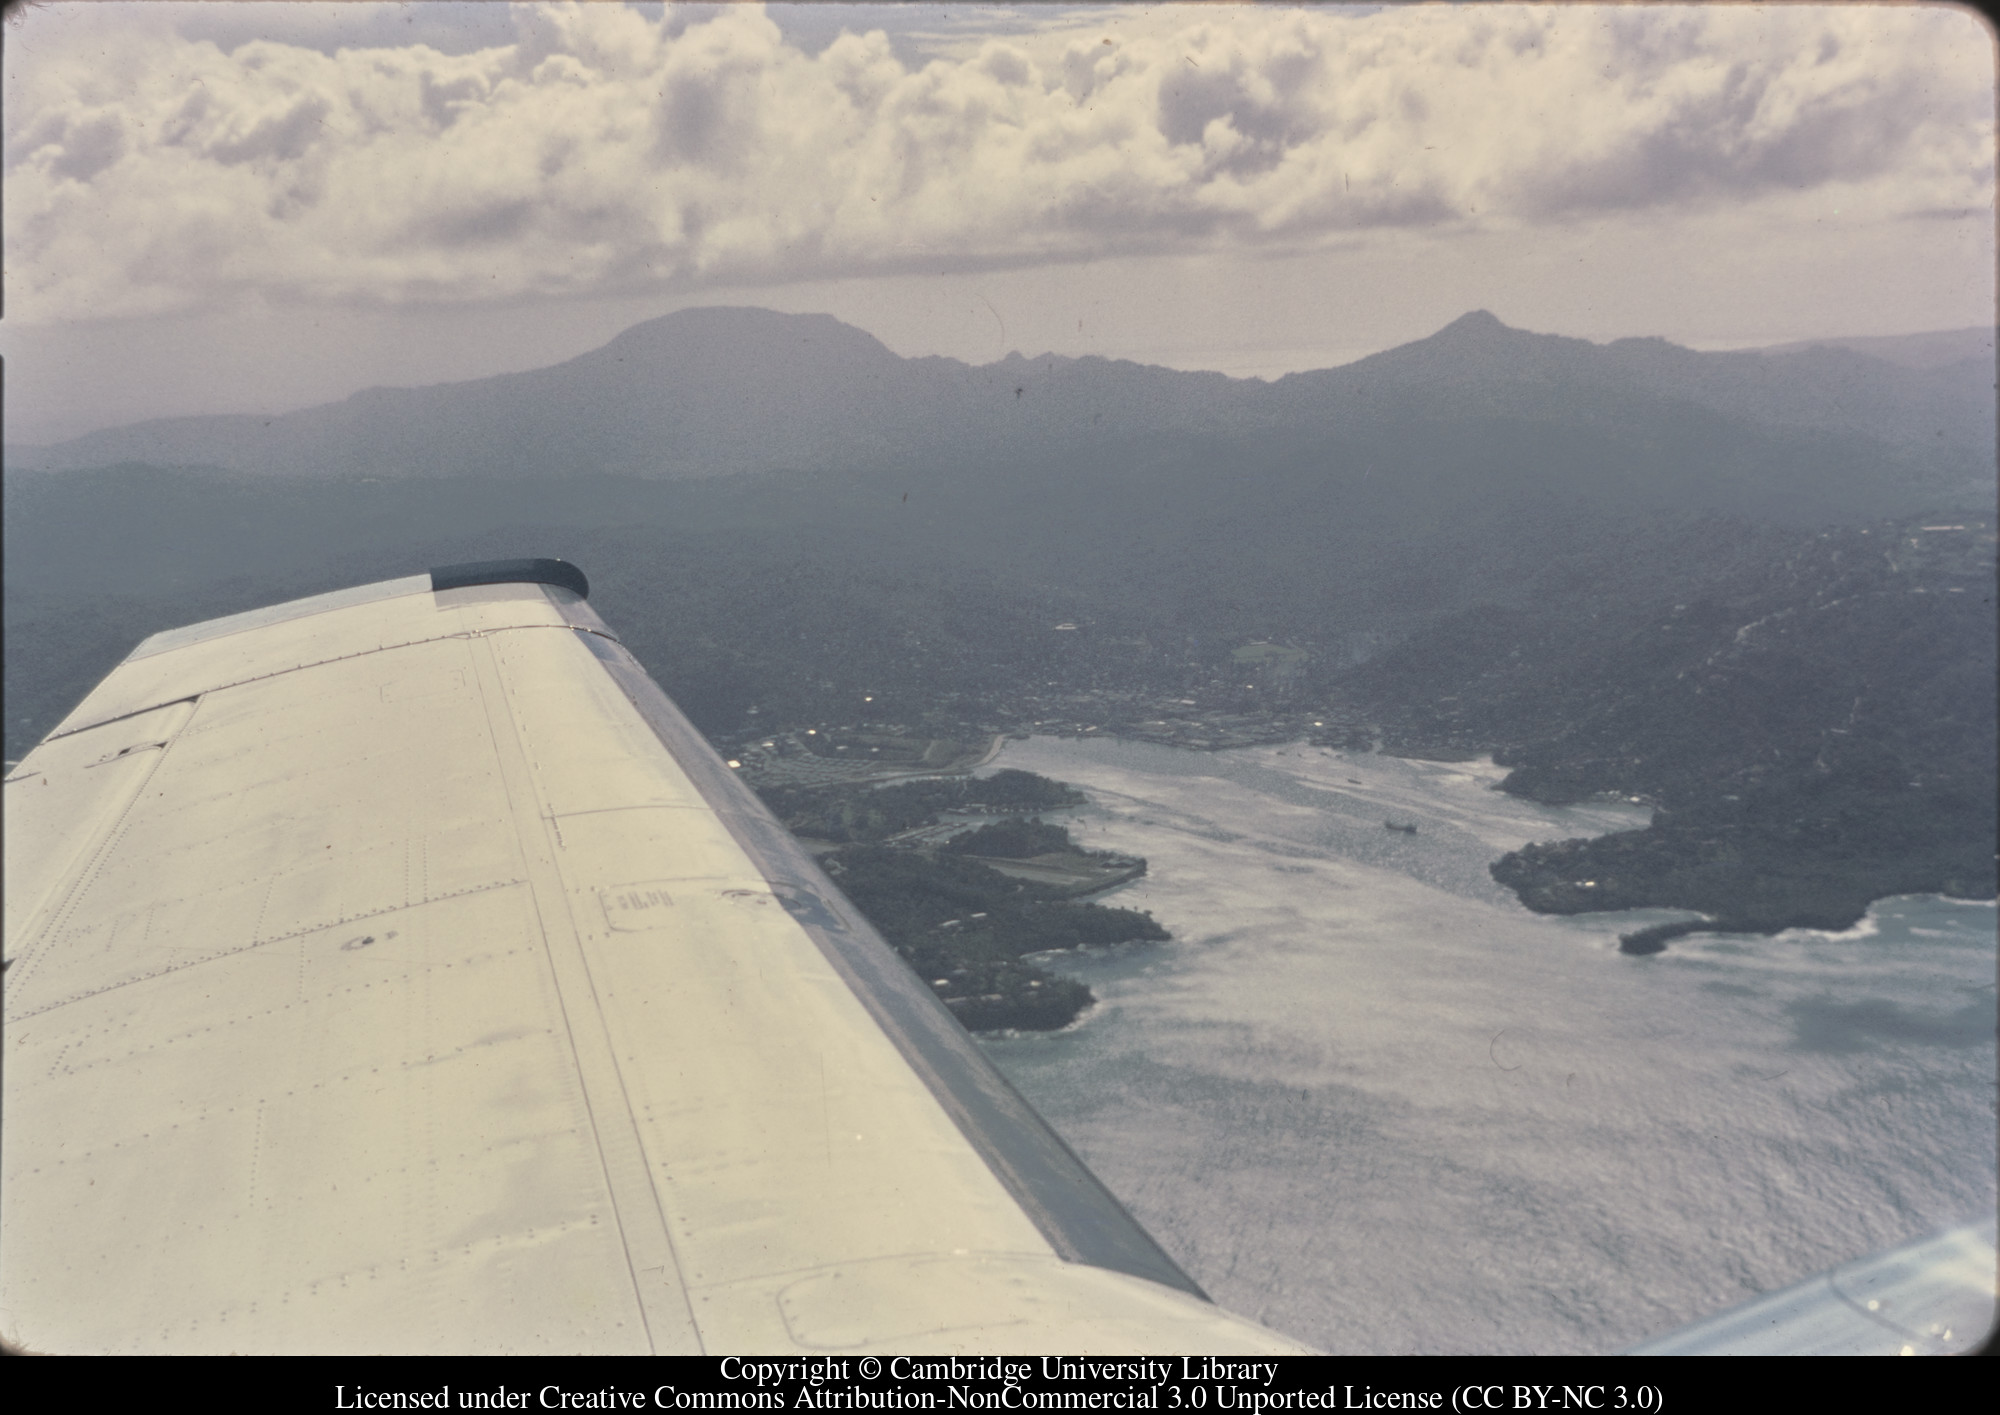 Castries from the air flying into Vigie, 1971-02